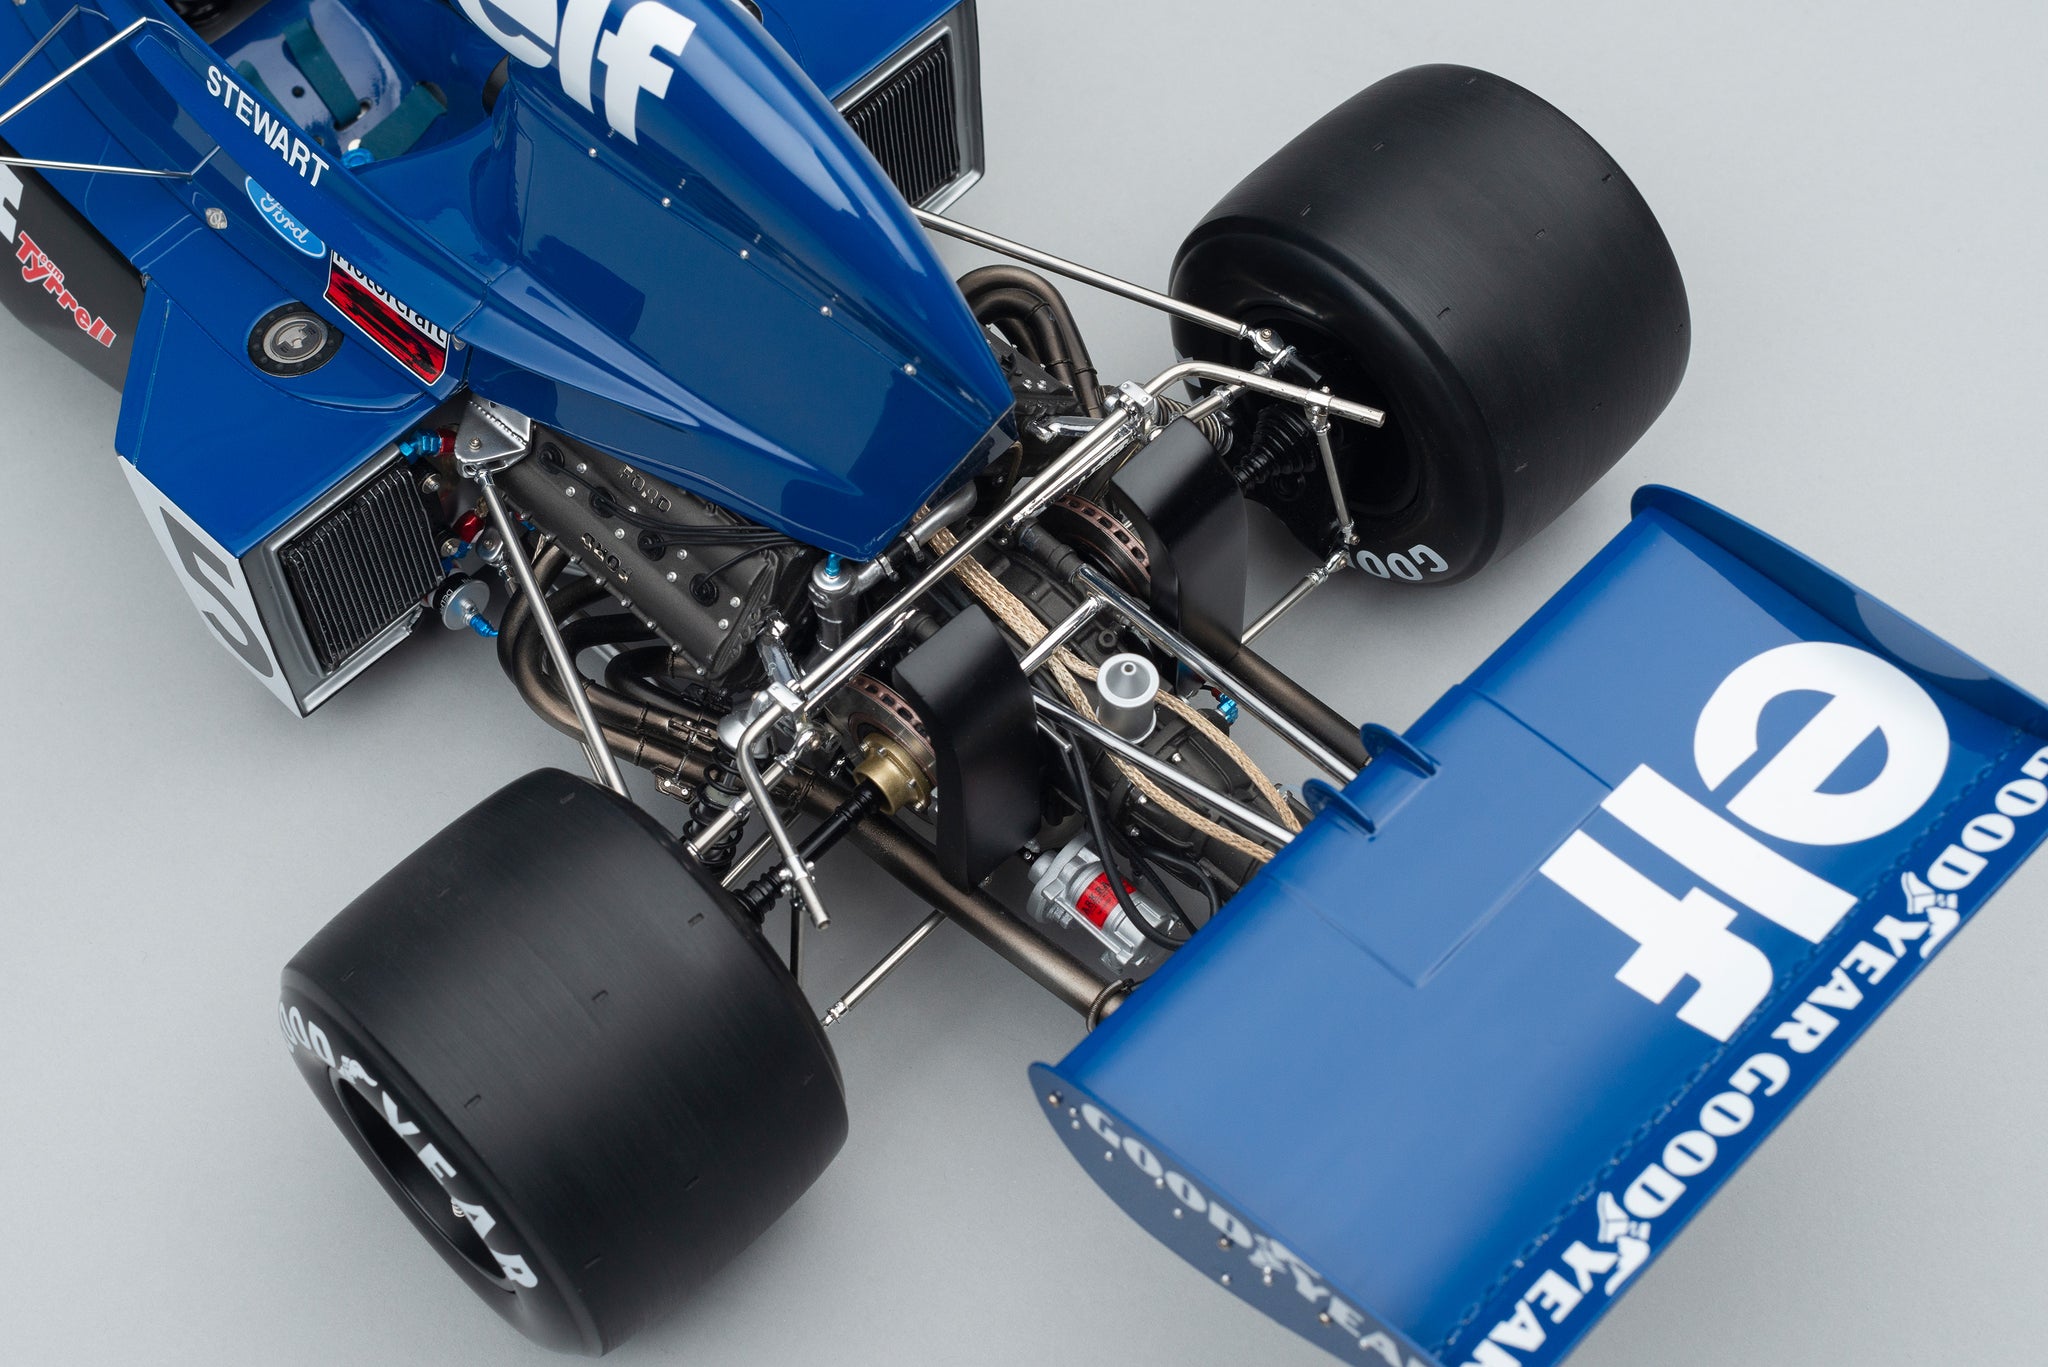 Tyrrell 006 at 1:8 scale